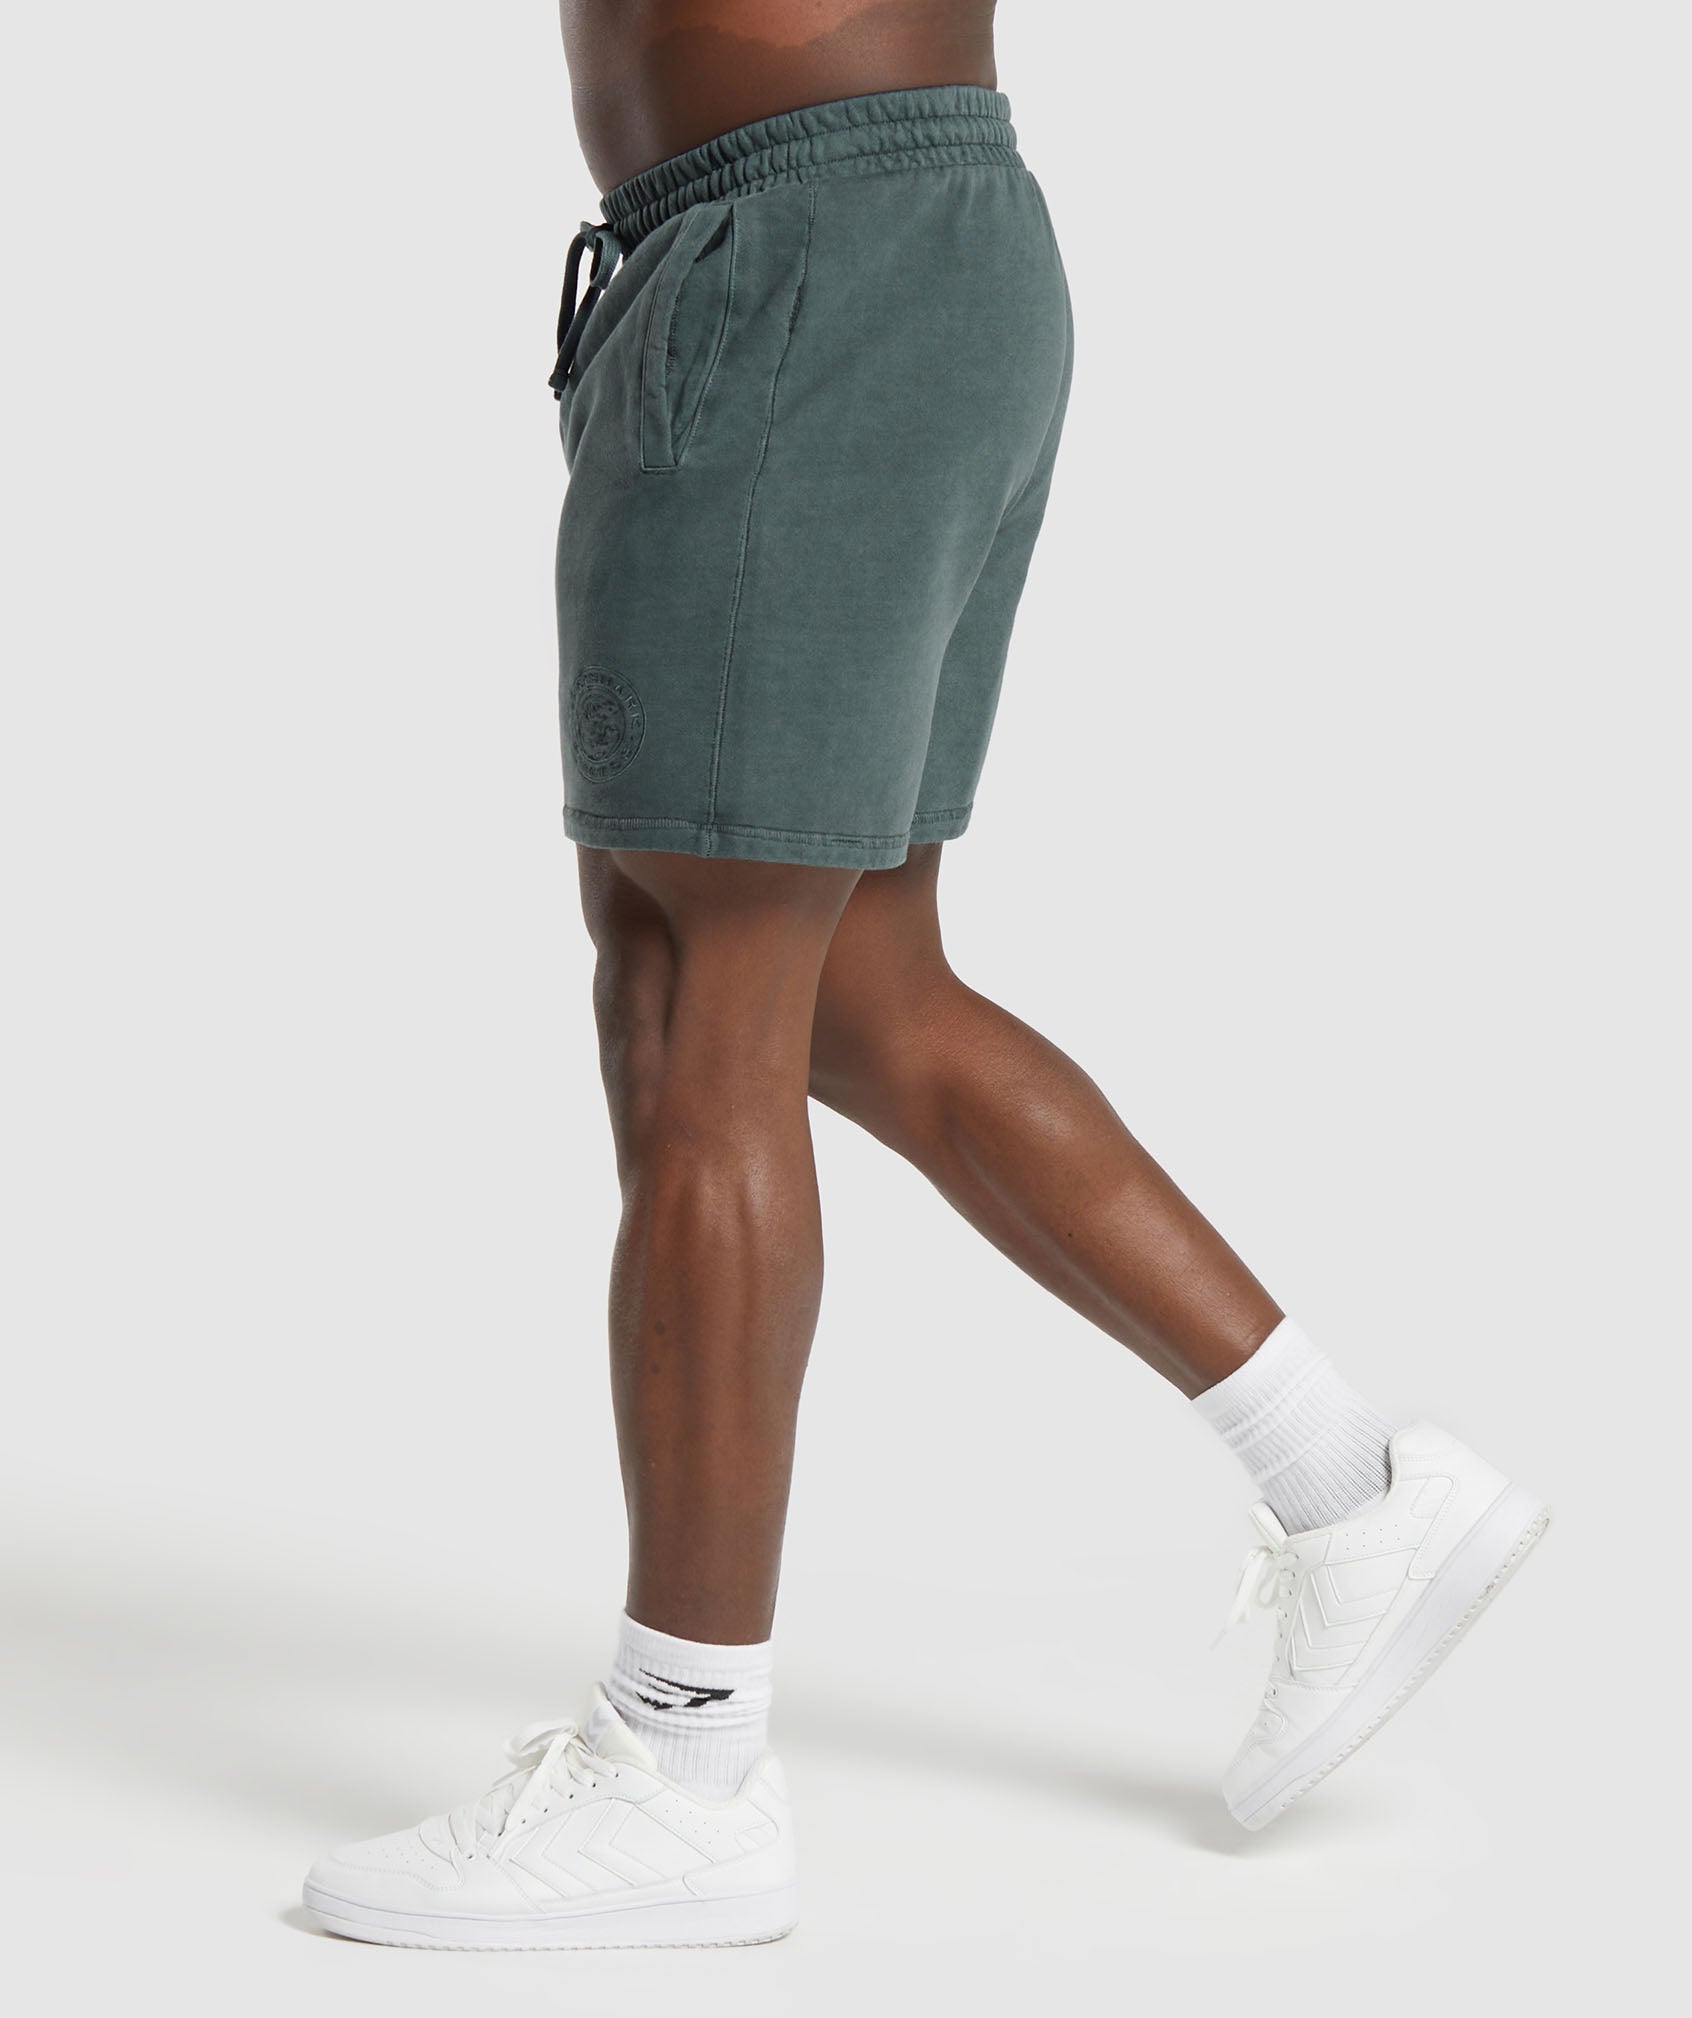 Premium Legacy Shorts in Cargo Teal - view 3